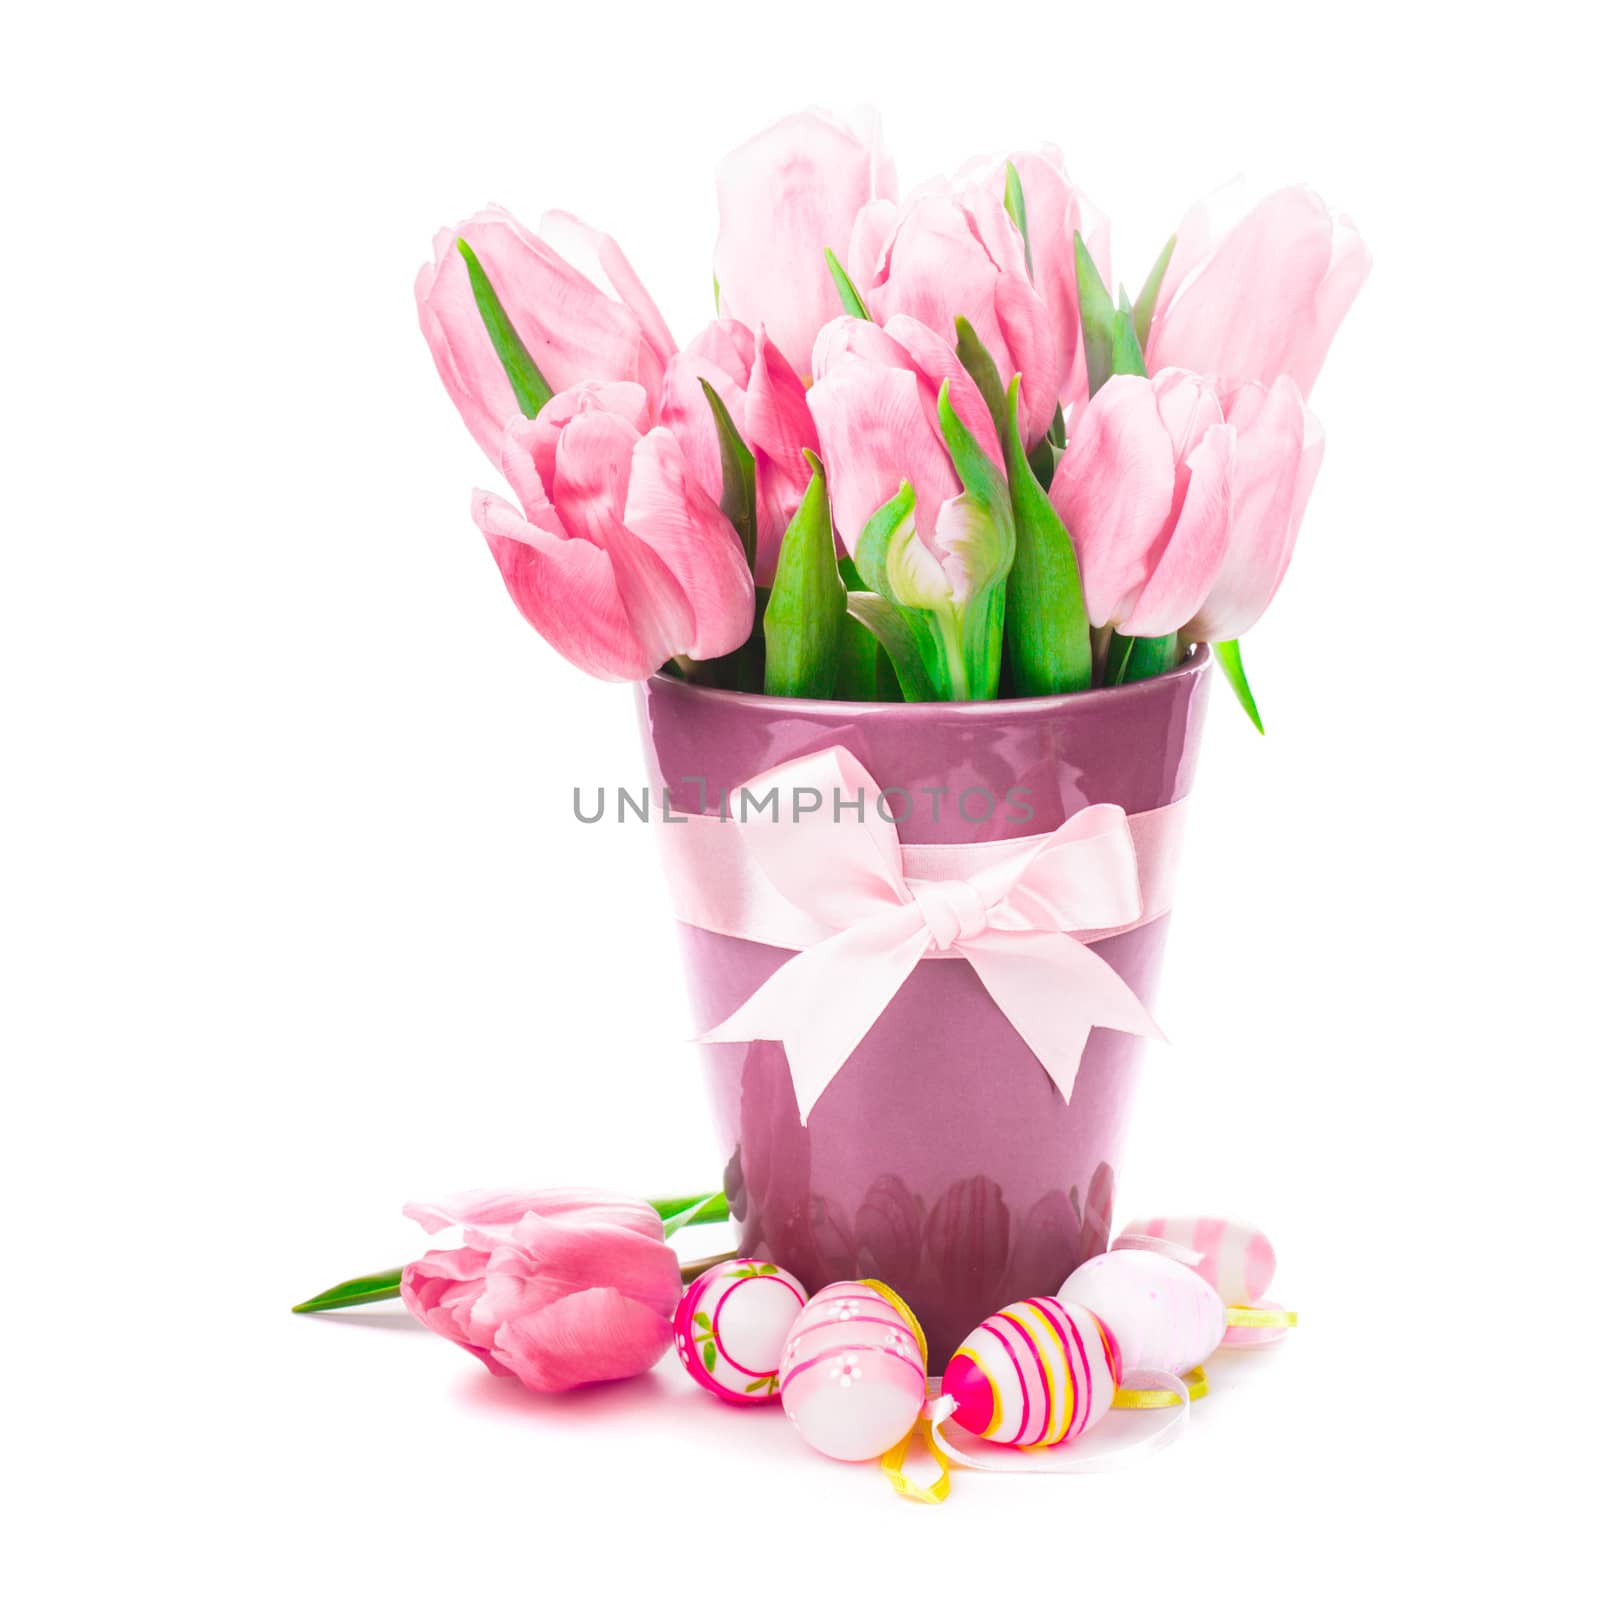 Tulips and eggs isolated by oksix